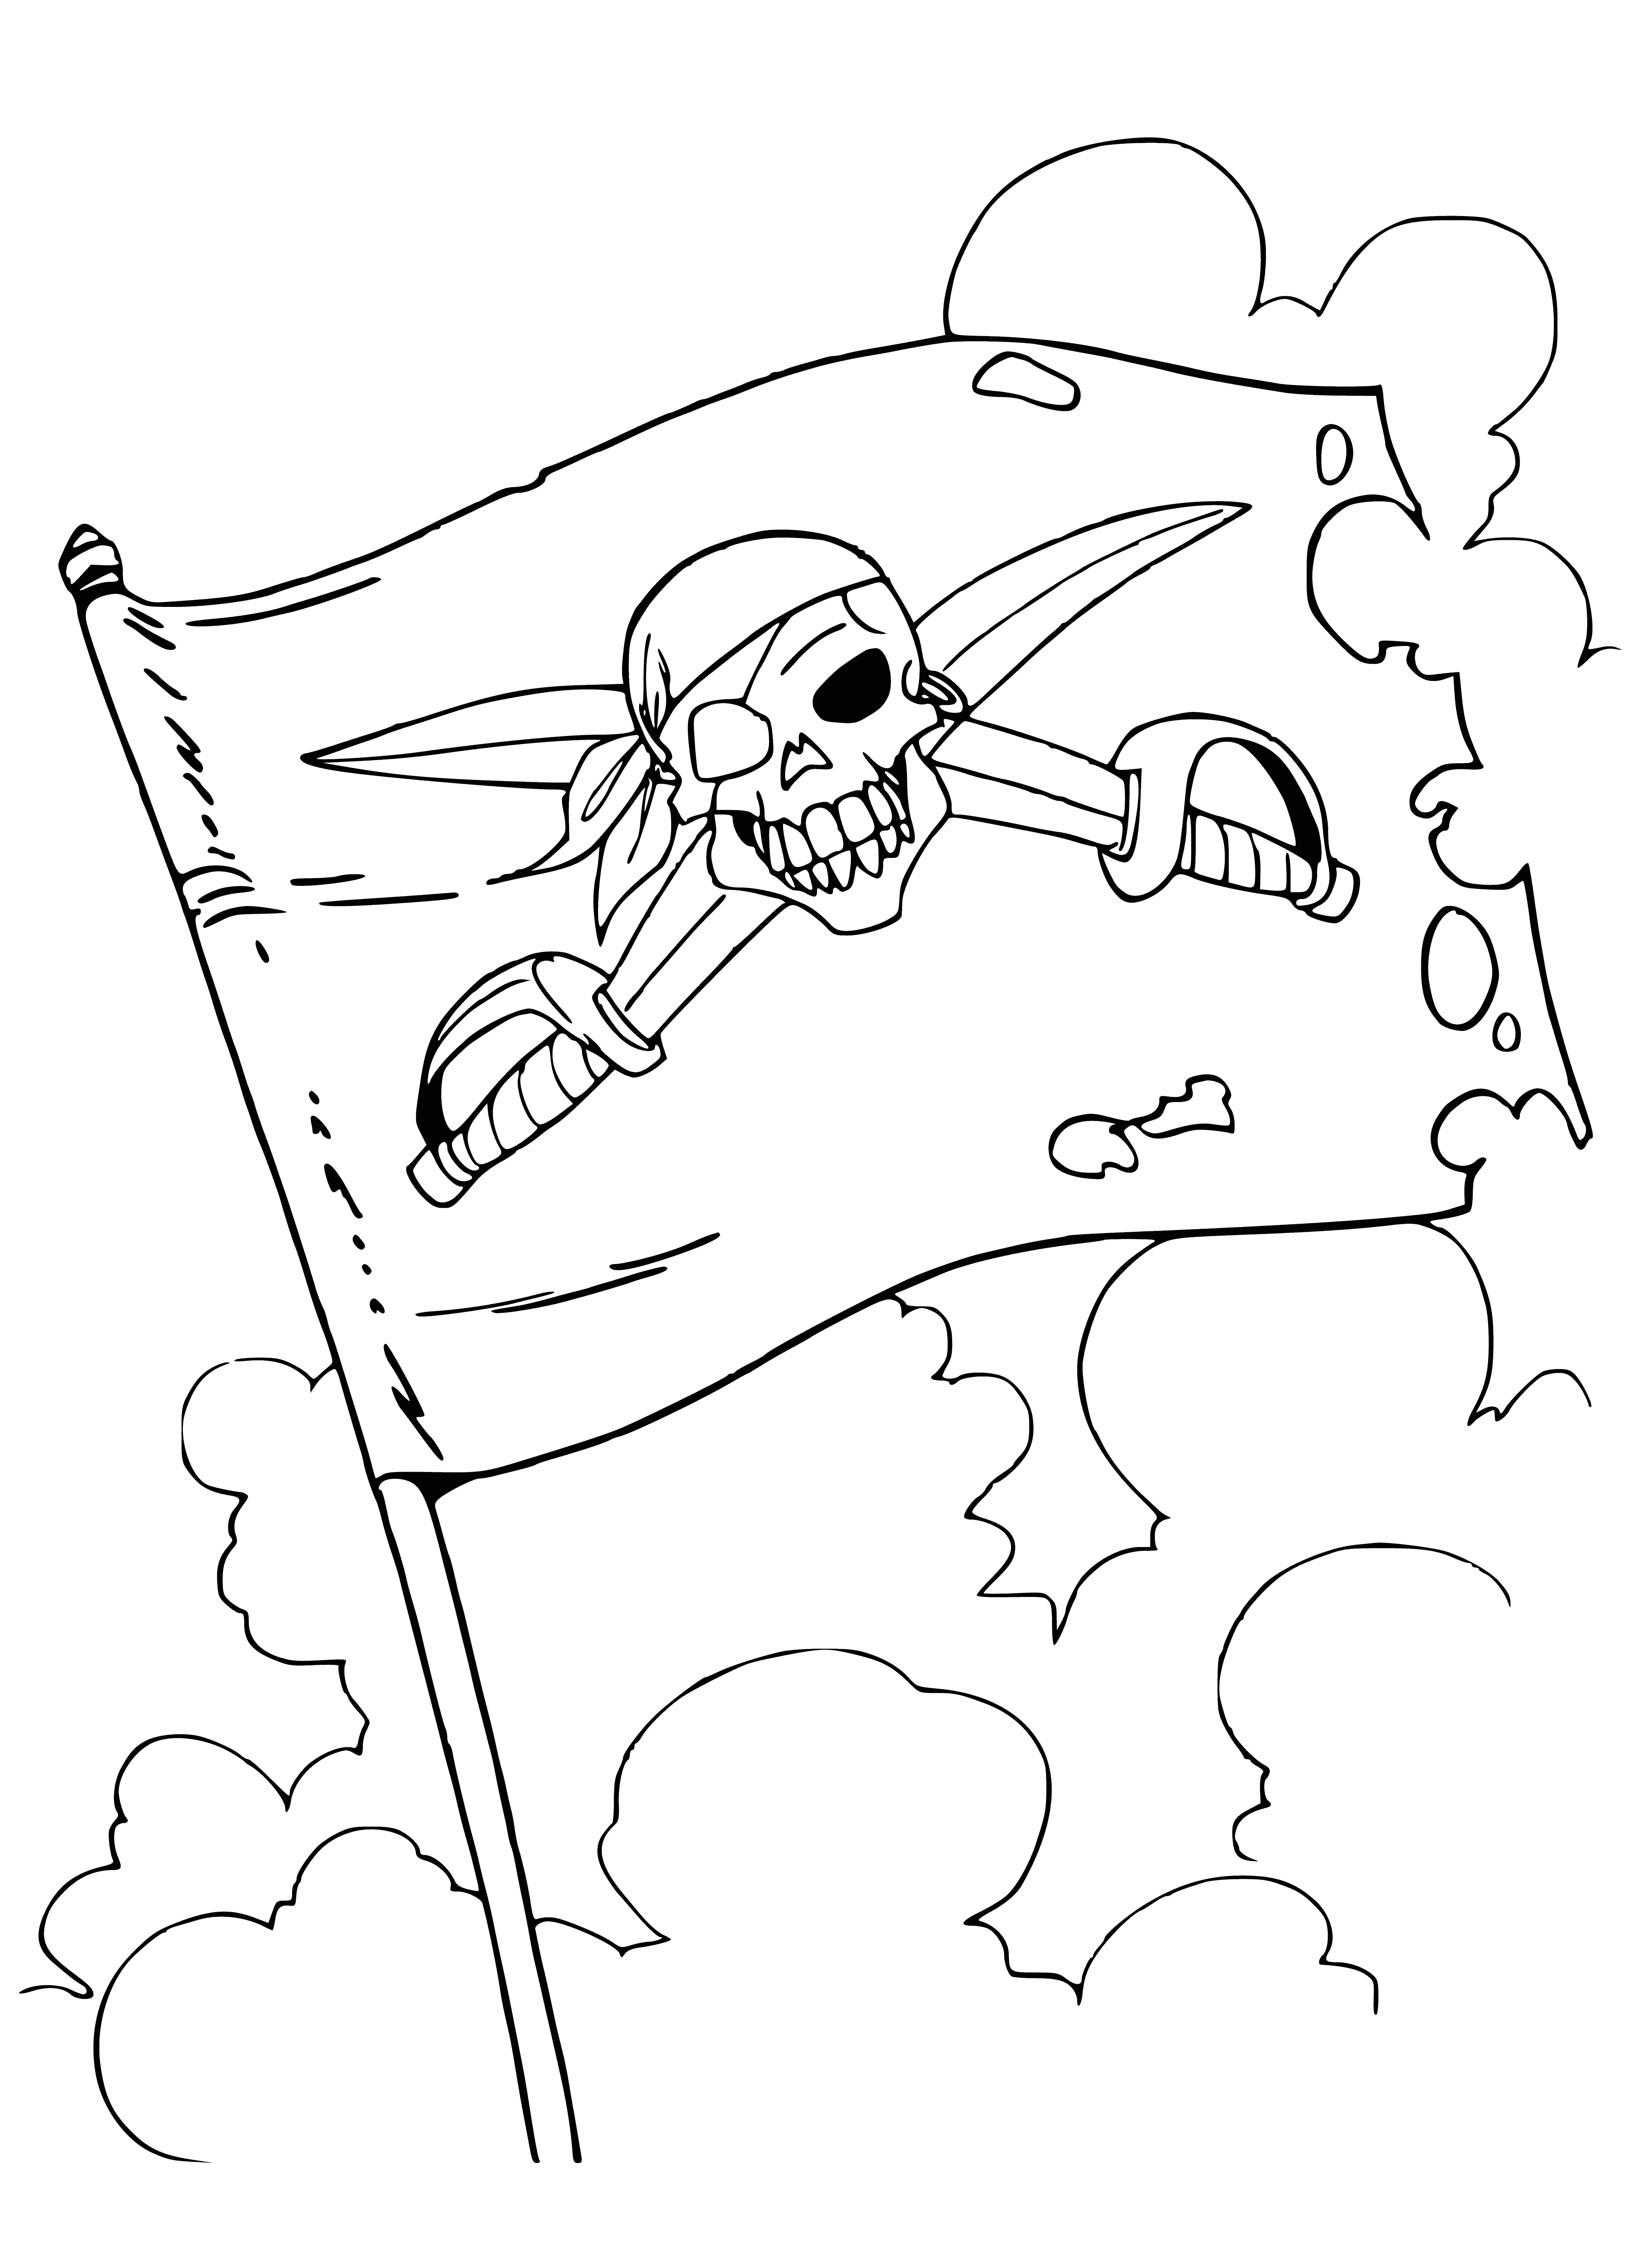 coloring page: Large ship sailing ocean w/ many sails & black flag w/ white skull & crossbones; small boats rowing towards it.